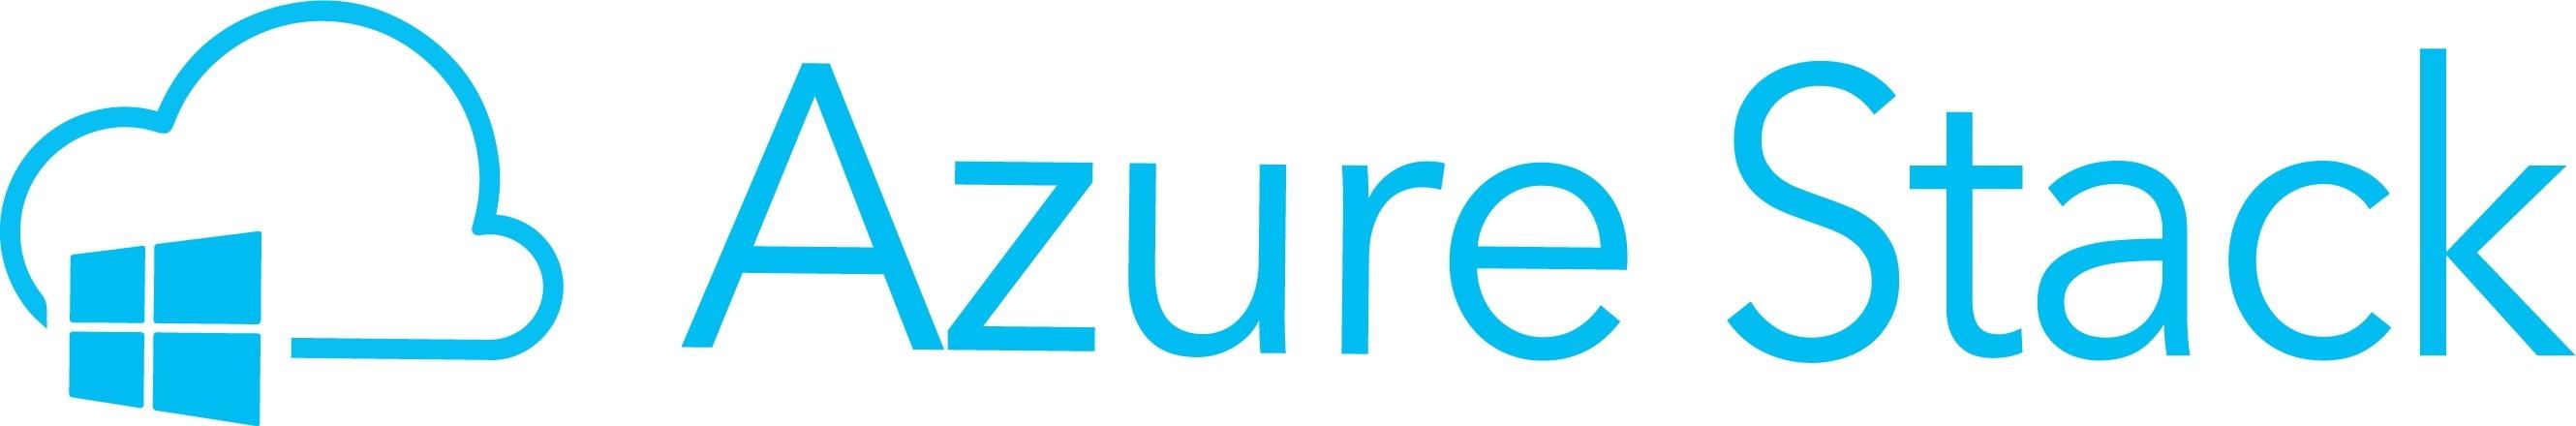 2018 Microsoft Azure Logo - What is Azure Stack? [Infographic]